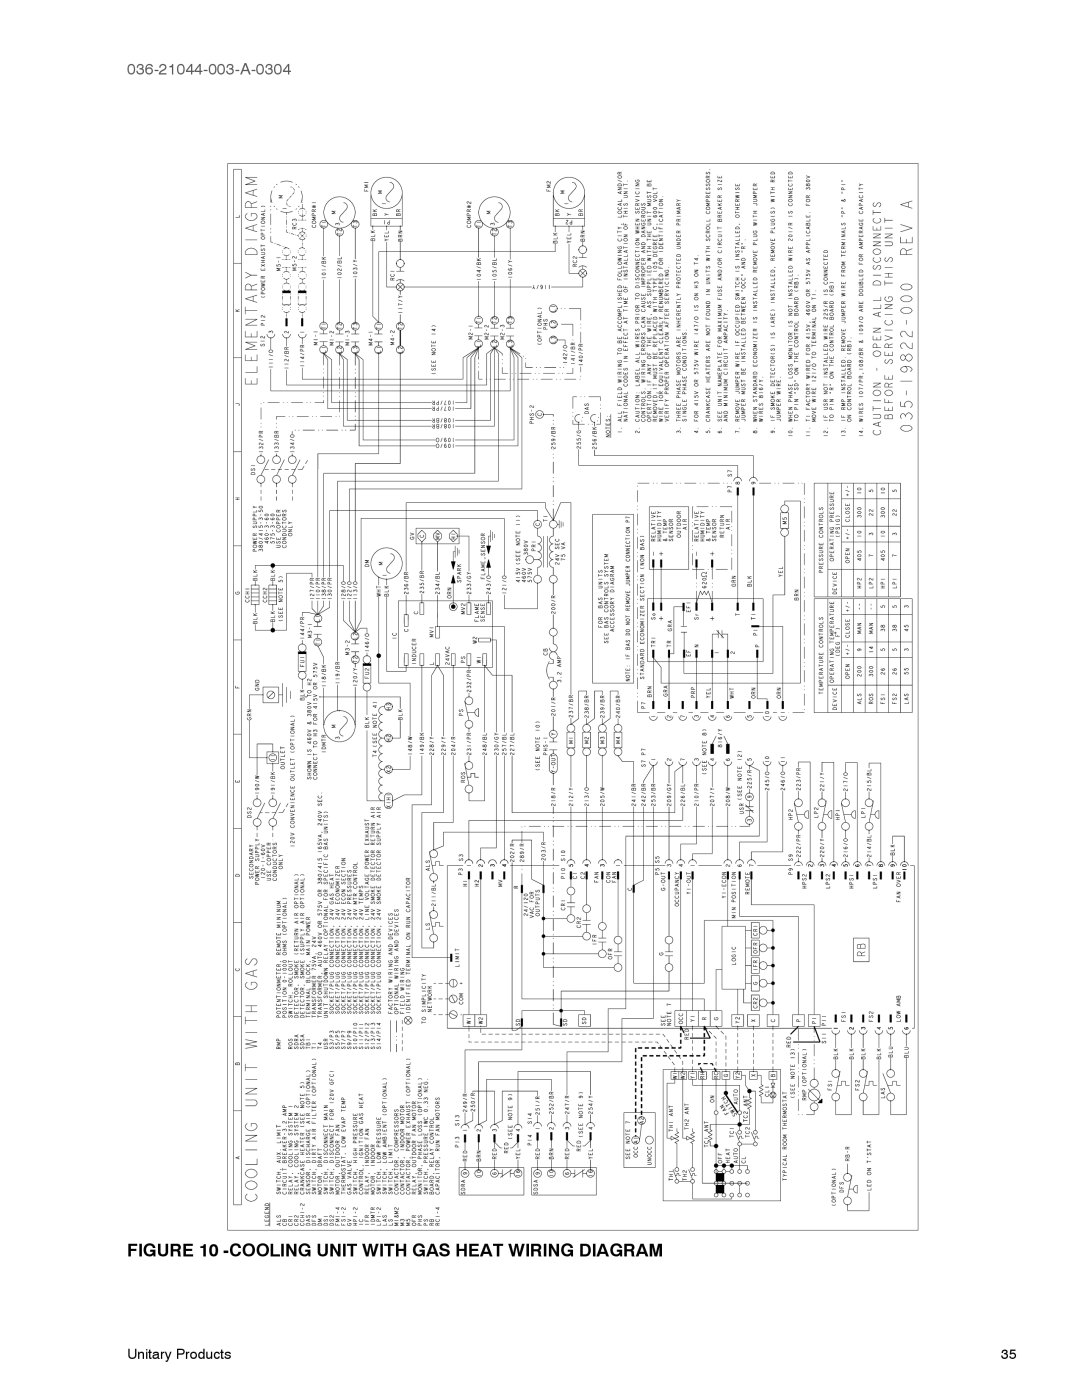 York DM120, DM150 manual Cooling Unit With Gas Heat Wiring Diagram, 036-21044-003-A-0304 